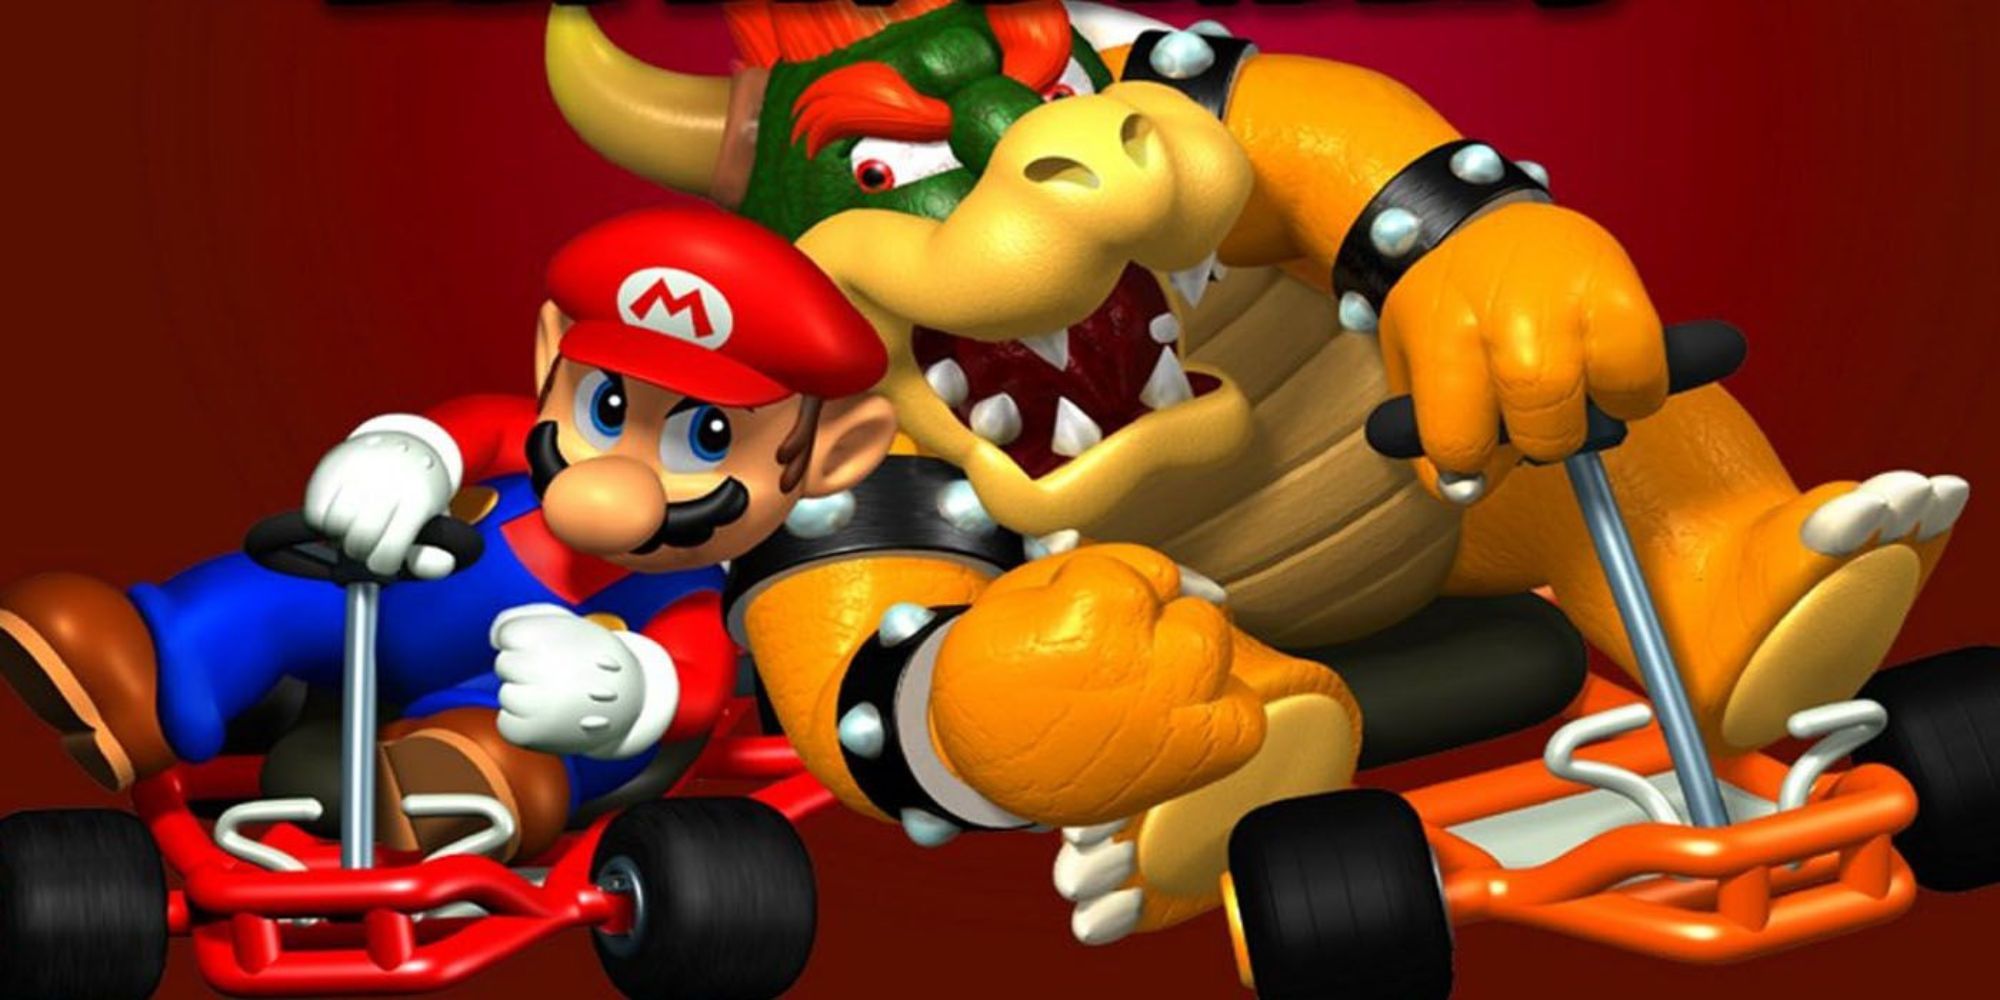 Mario and Bowser lean towards each other while driving